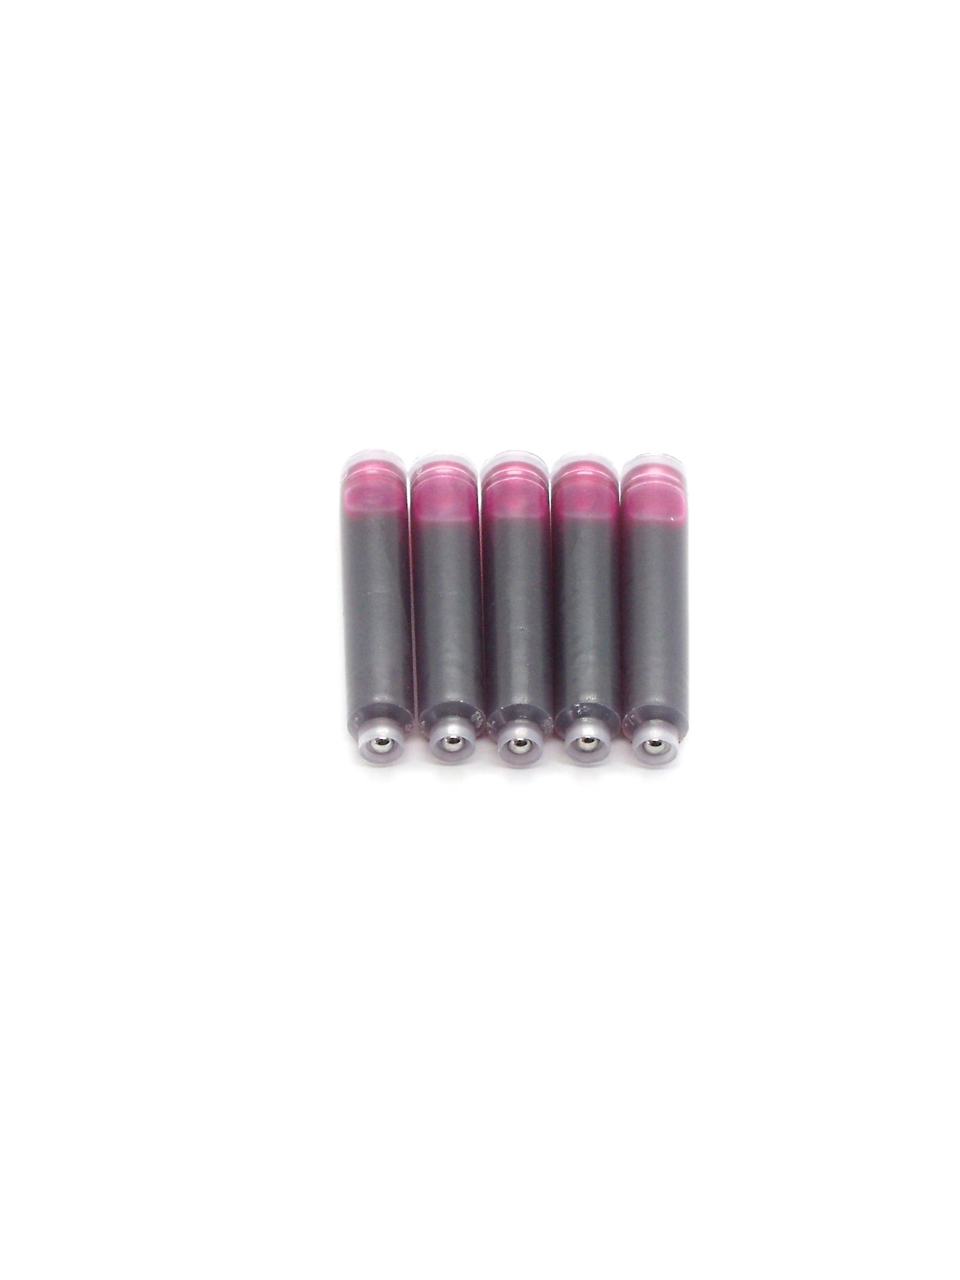 Top Ink Cartridges For Yafa Fountain Pens (Pink)